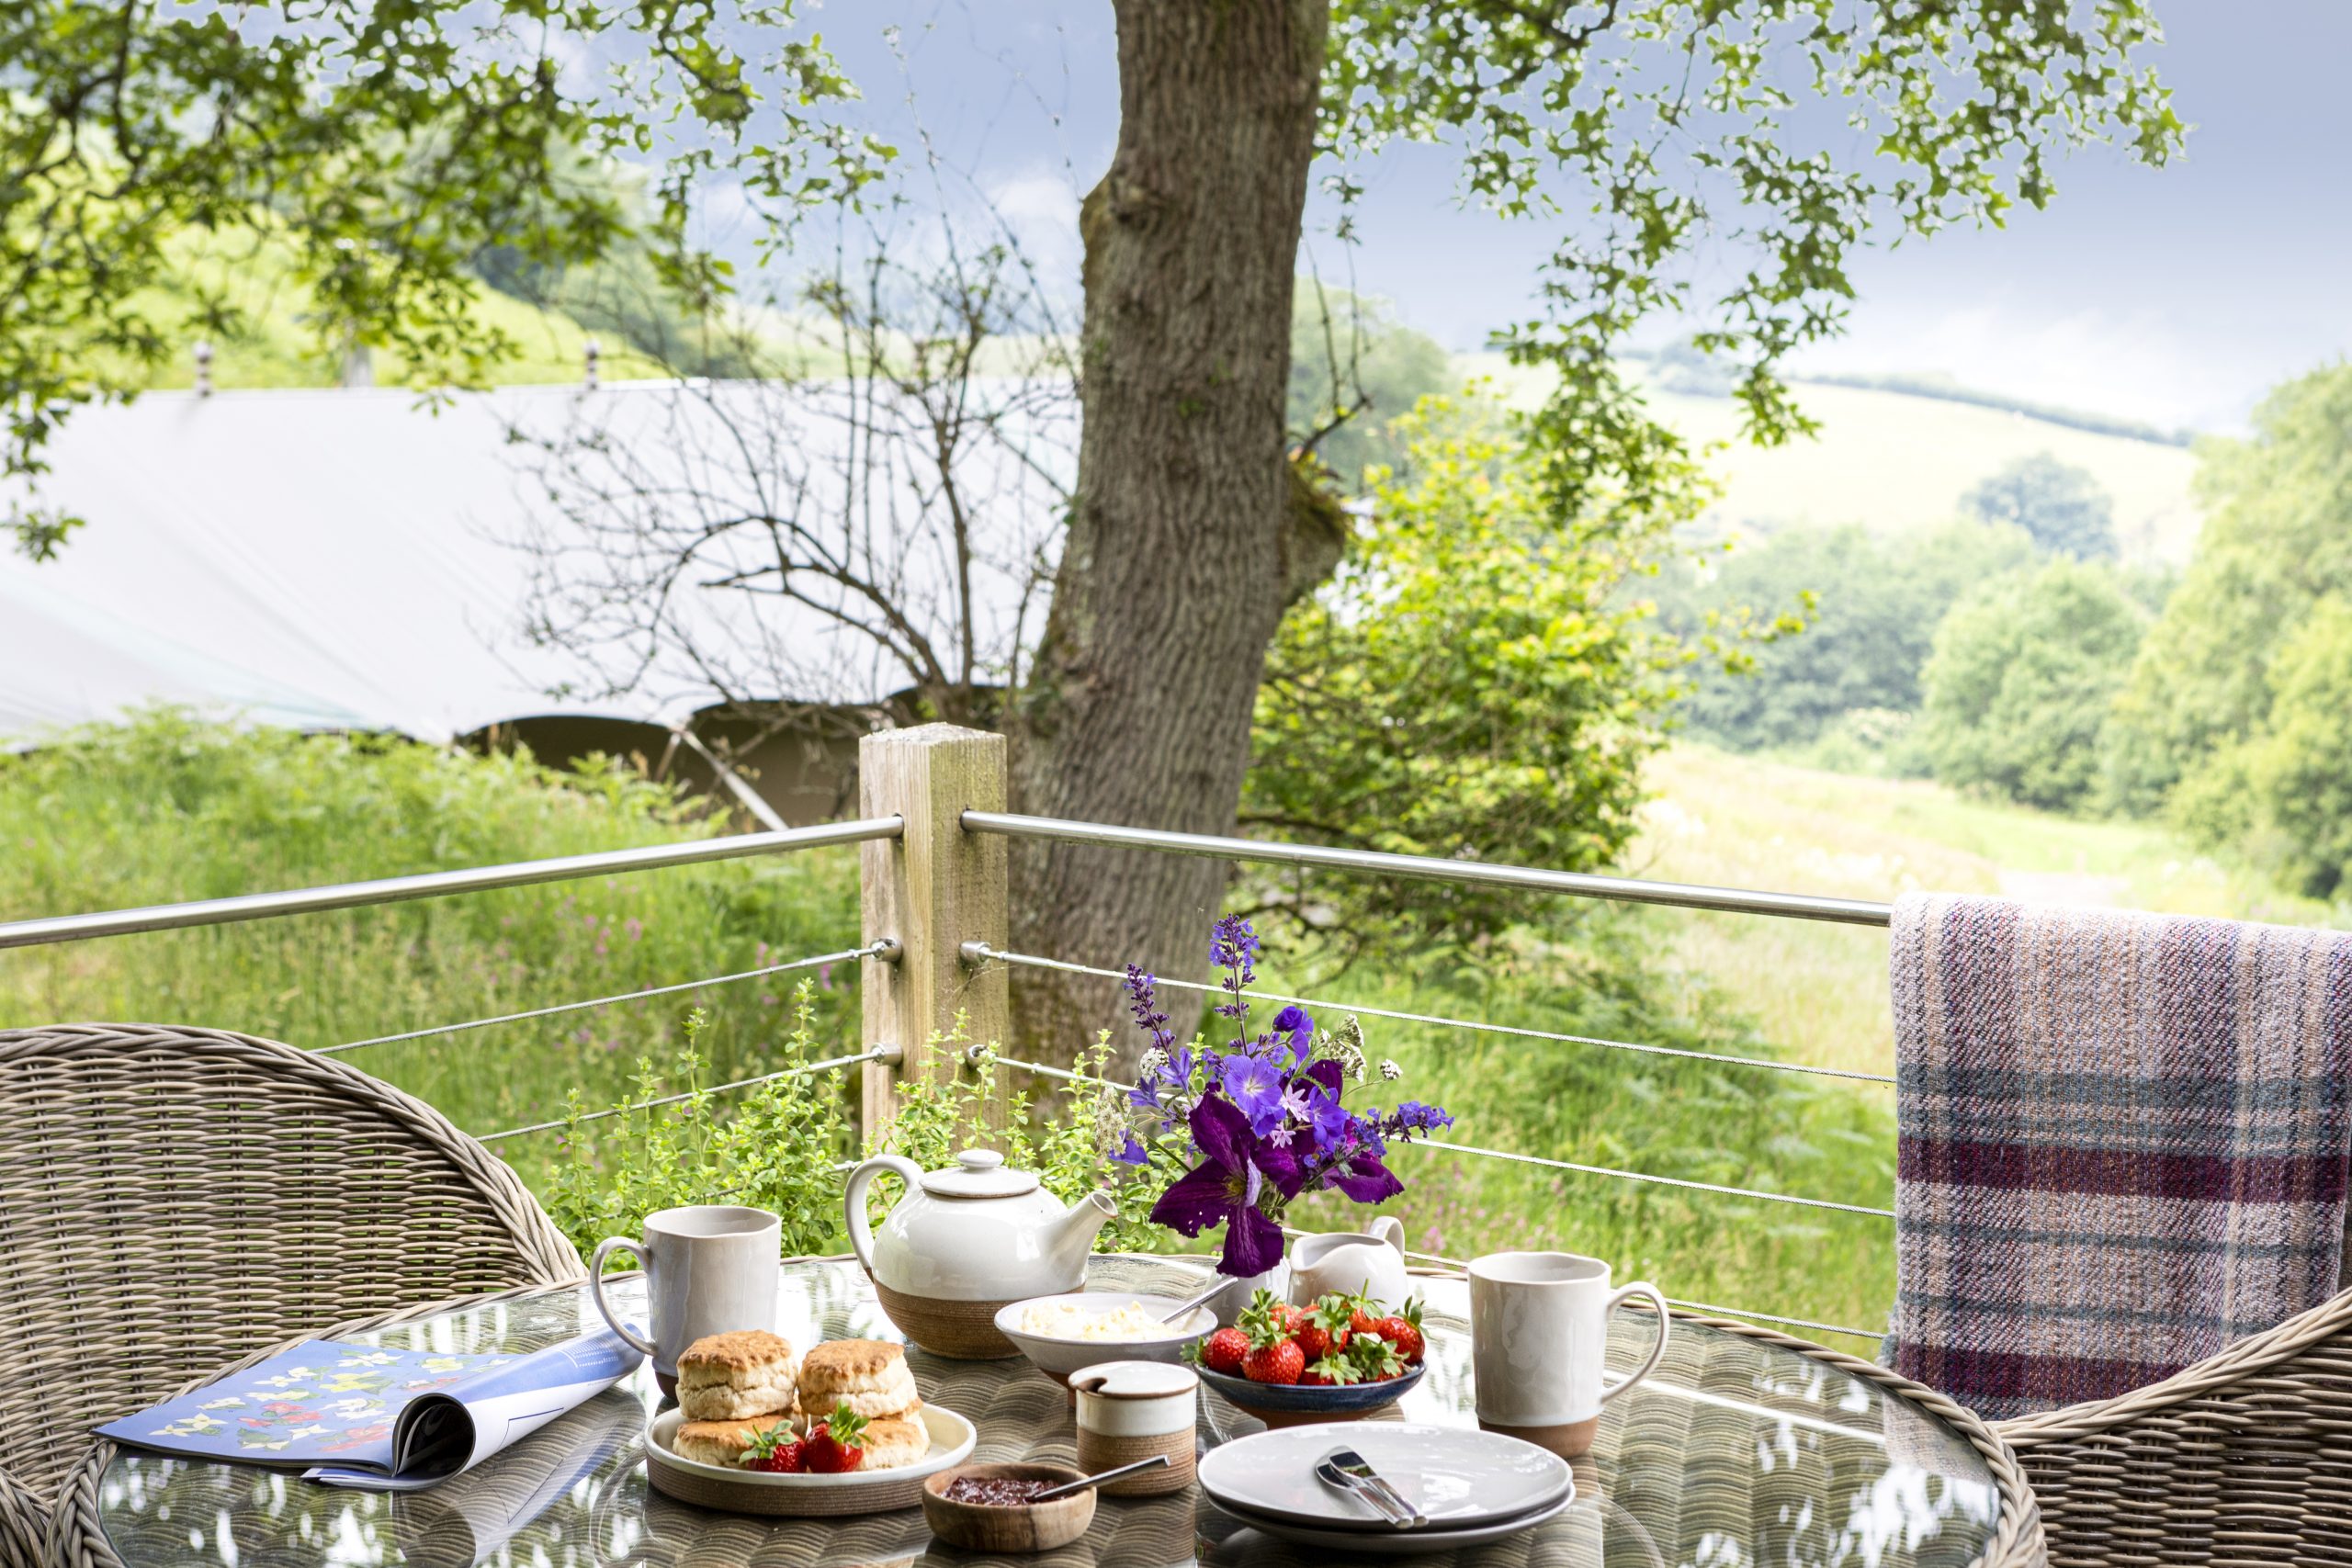 Afternoon tea set out on the deck of a luxury glamping lodge in North Devon